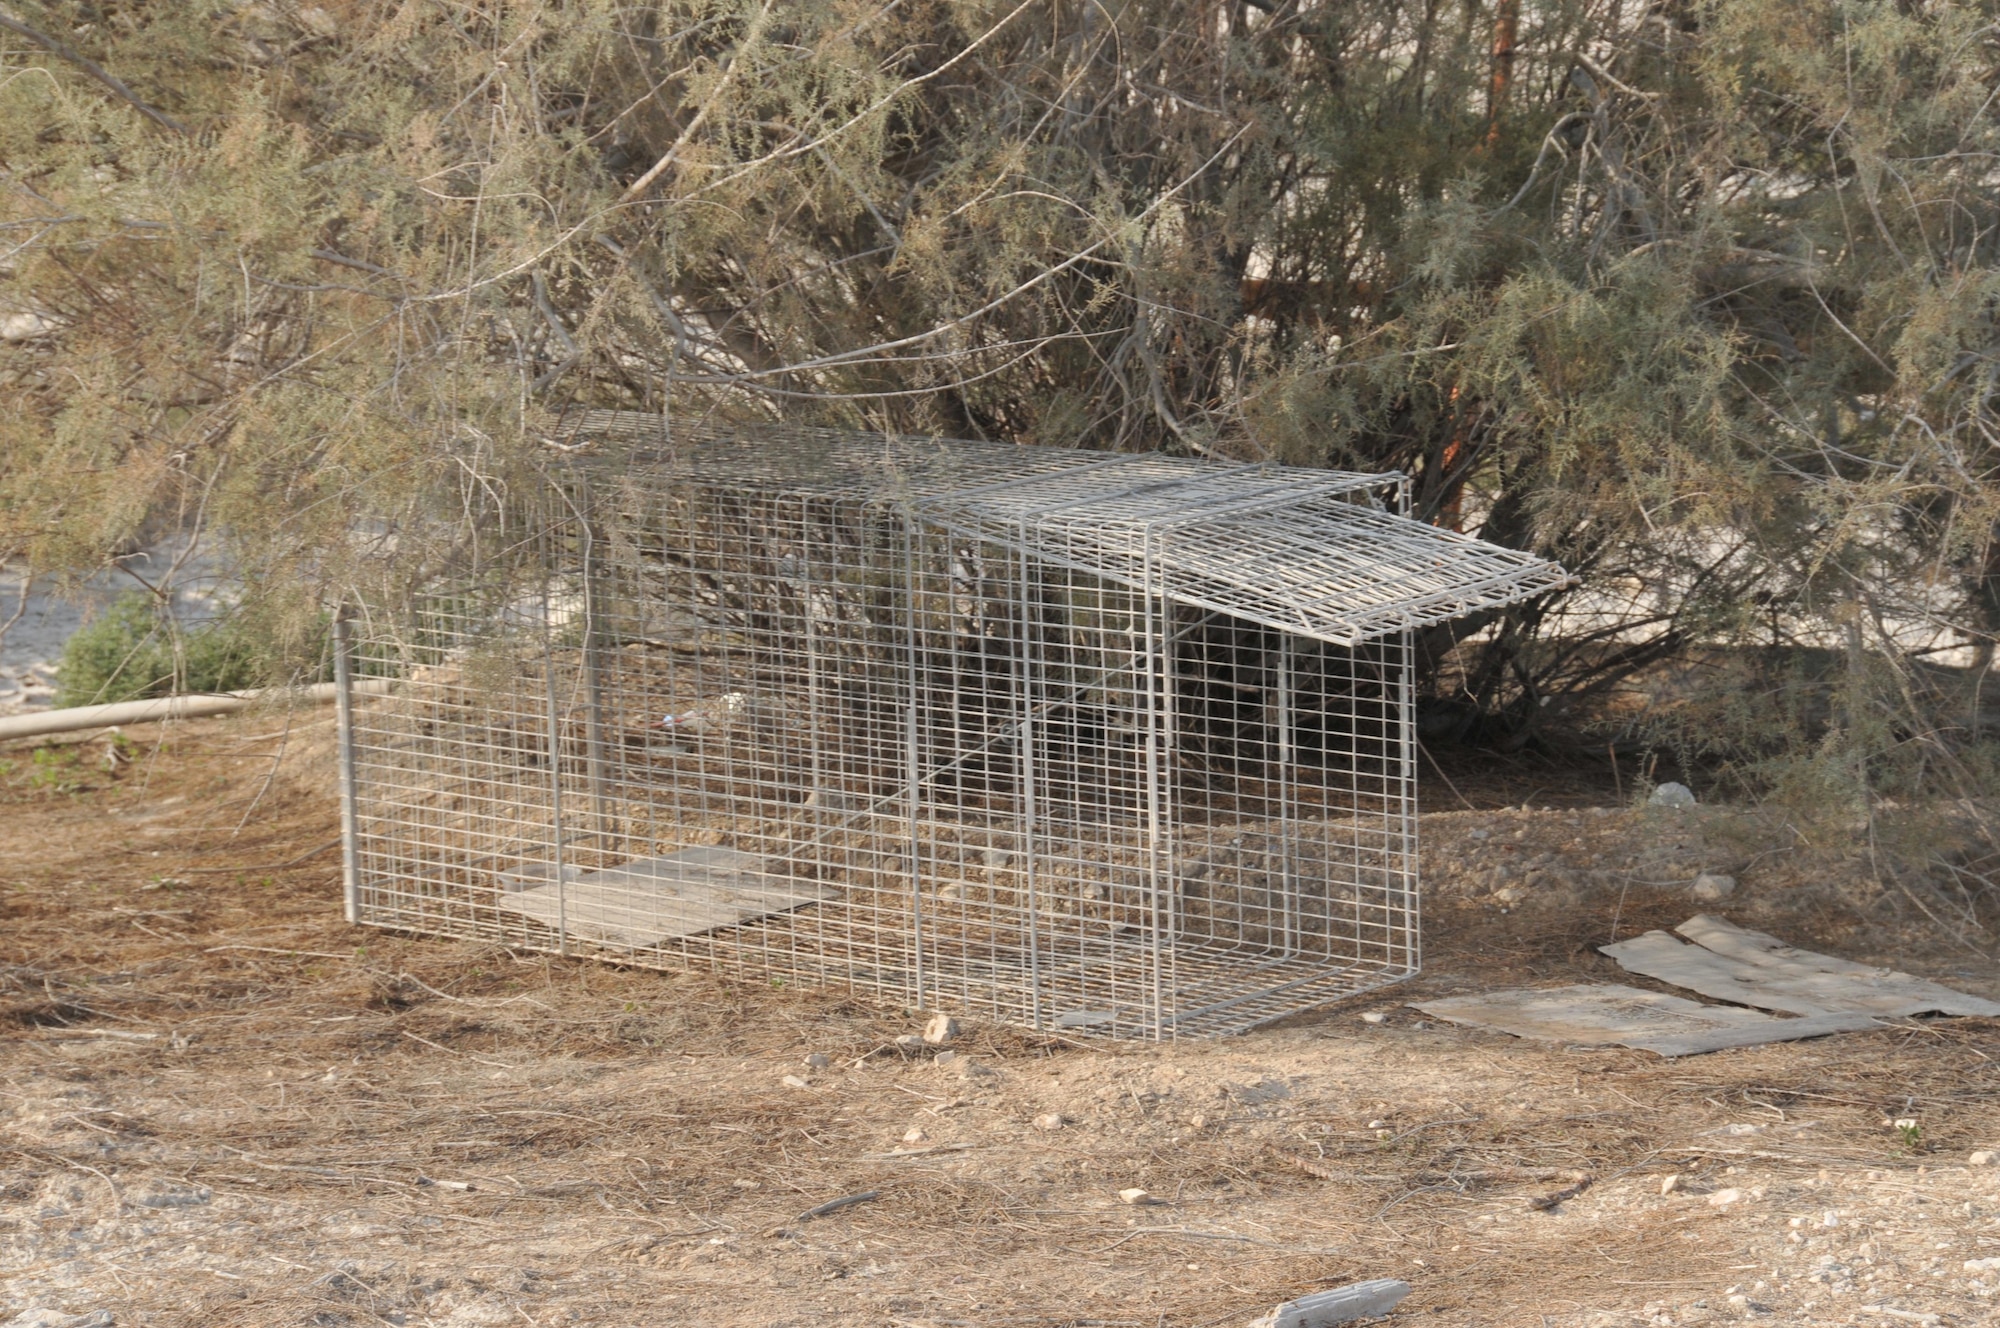 The 379th Expeditionary Civil Engineer Squadron pest management technicians use cages to catch wild dogs at Al Udeid Air Base, Qatar. AUAB is a natural habitat for foxes, so when they are caught in a cage, they are released back into their natural environment. Pest management emphasizes do not feed the animals. (U.S. Air Force photo by Tech. Sgt. Terrica Y. Jones/Released)